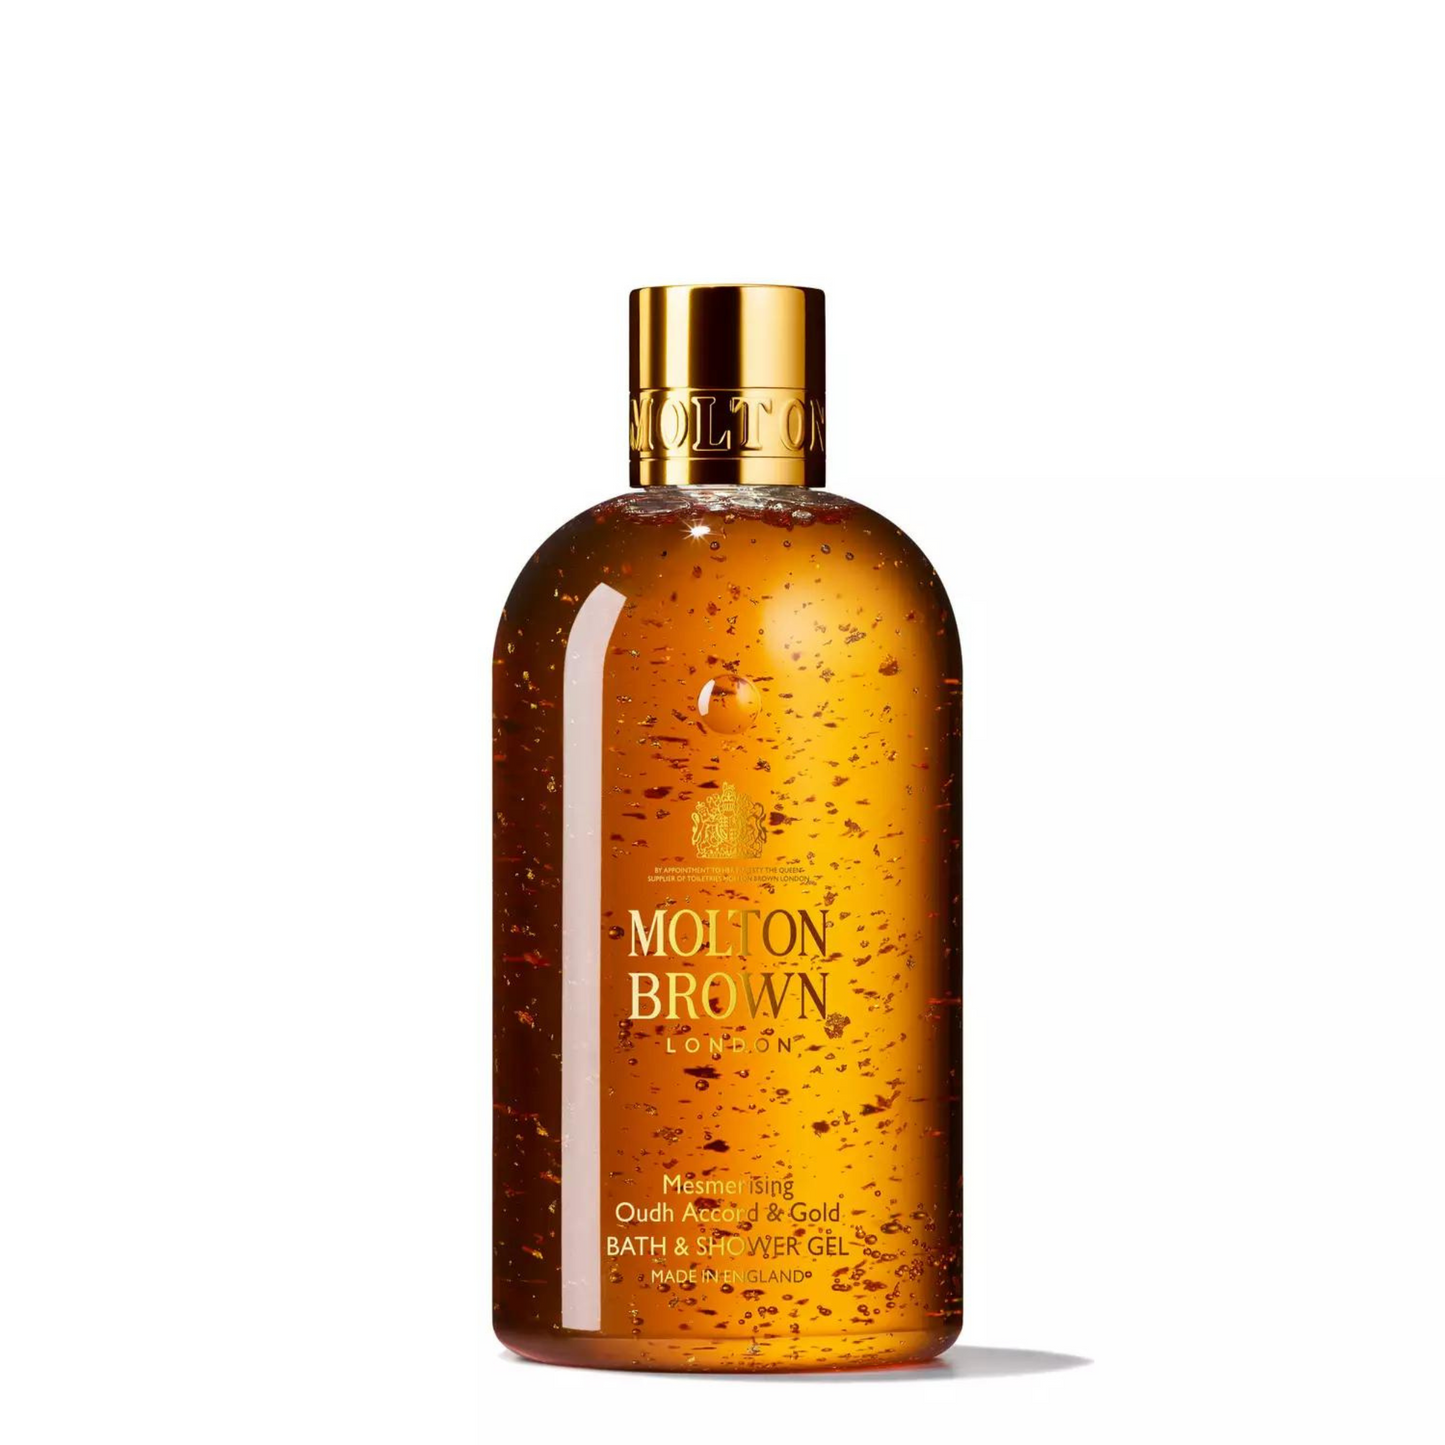 Primary Image of Mesmerising Oudh Accord & Gold Bath & Shower Gel